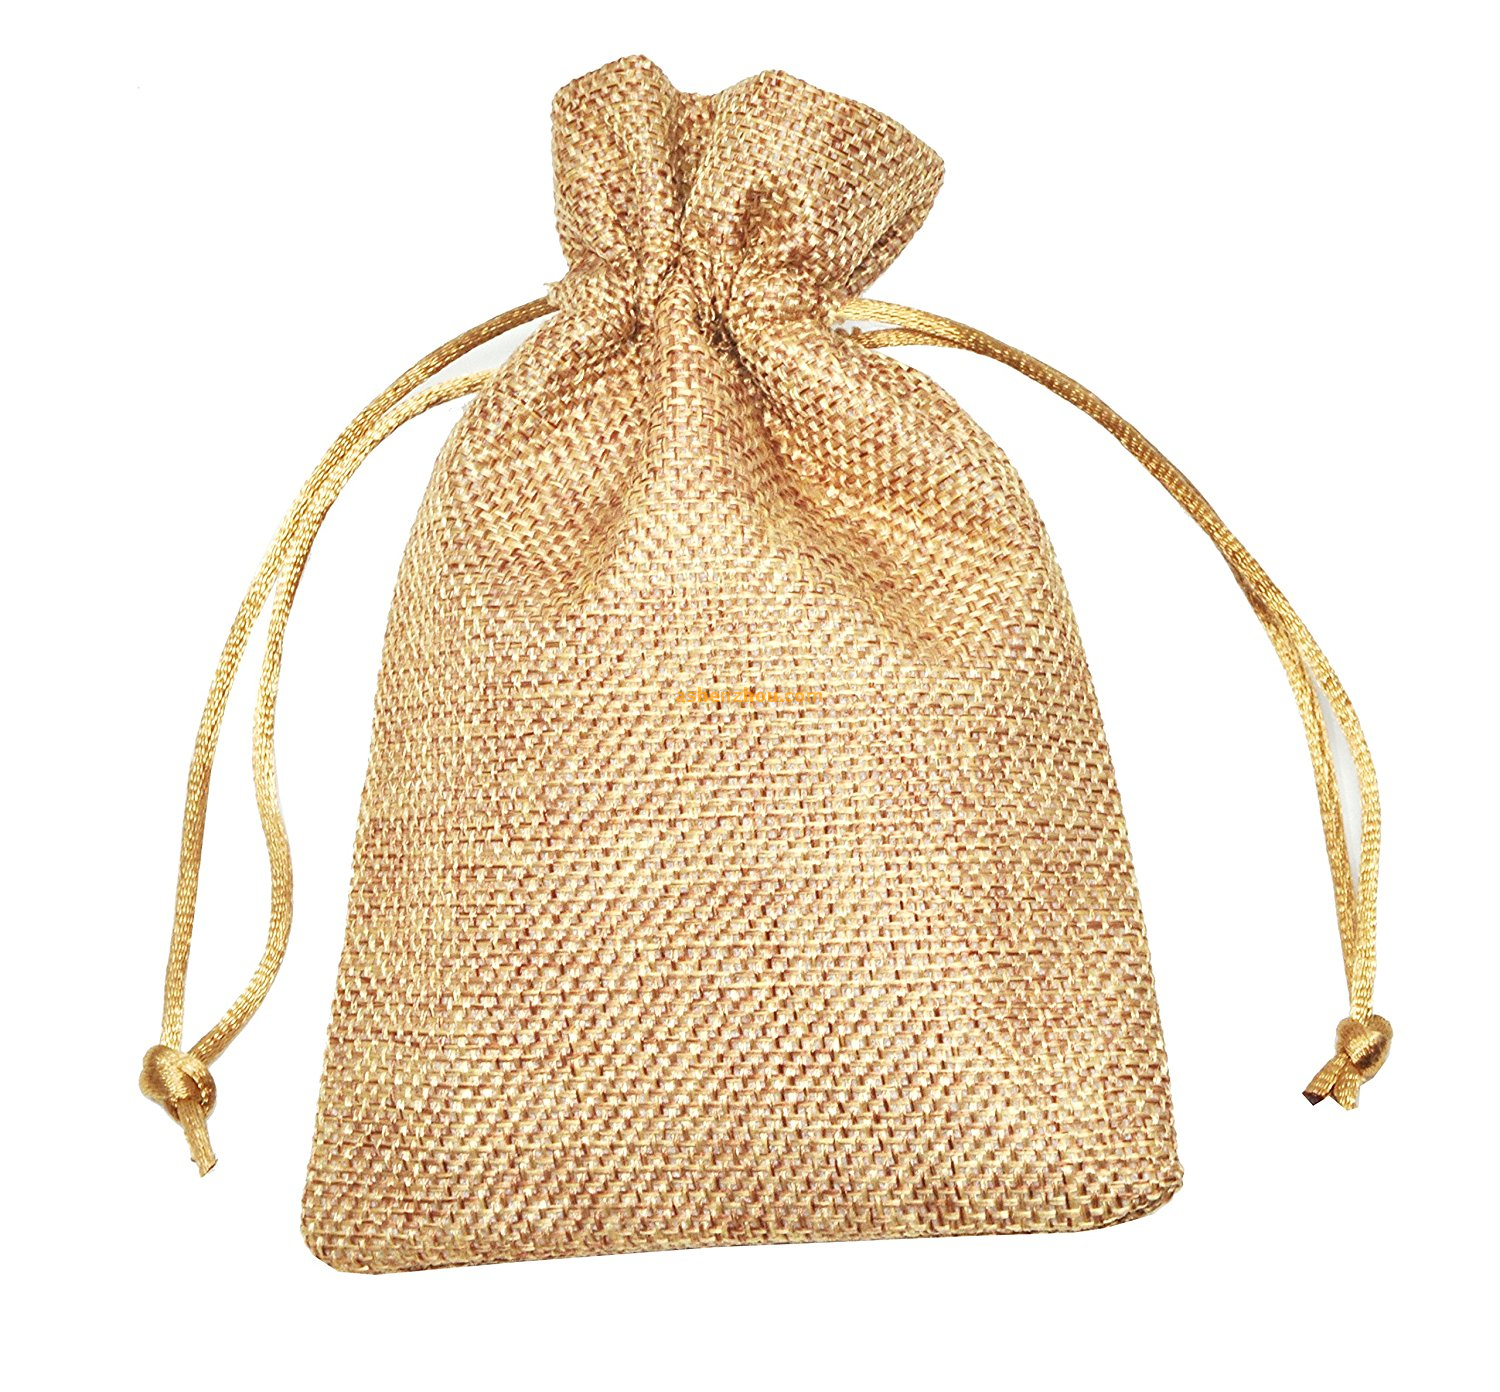 China factory wholesale price promotiona cheap jute bags burlap tote drawstring bags with handles for promotional